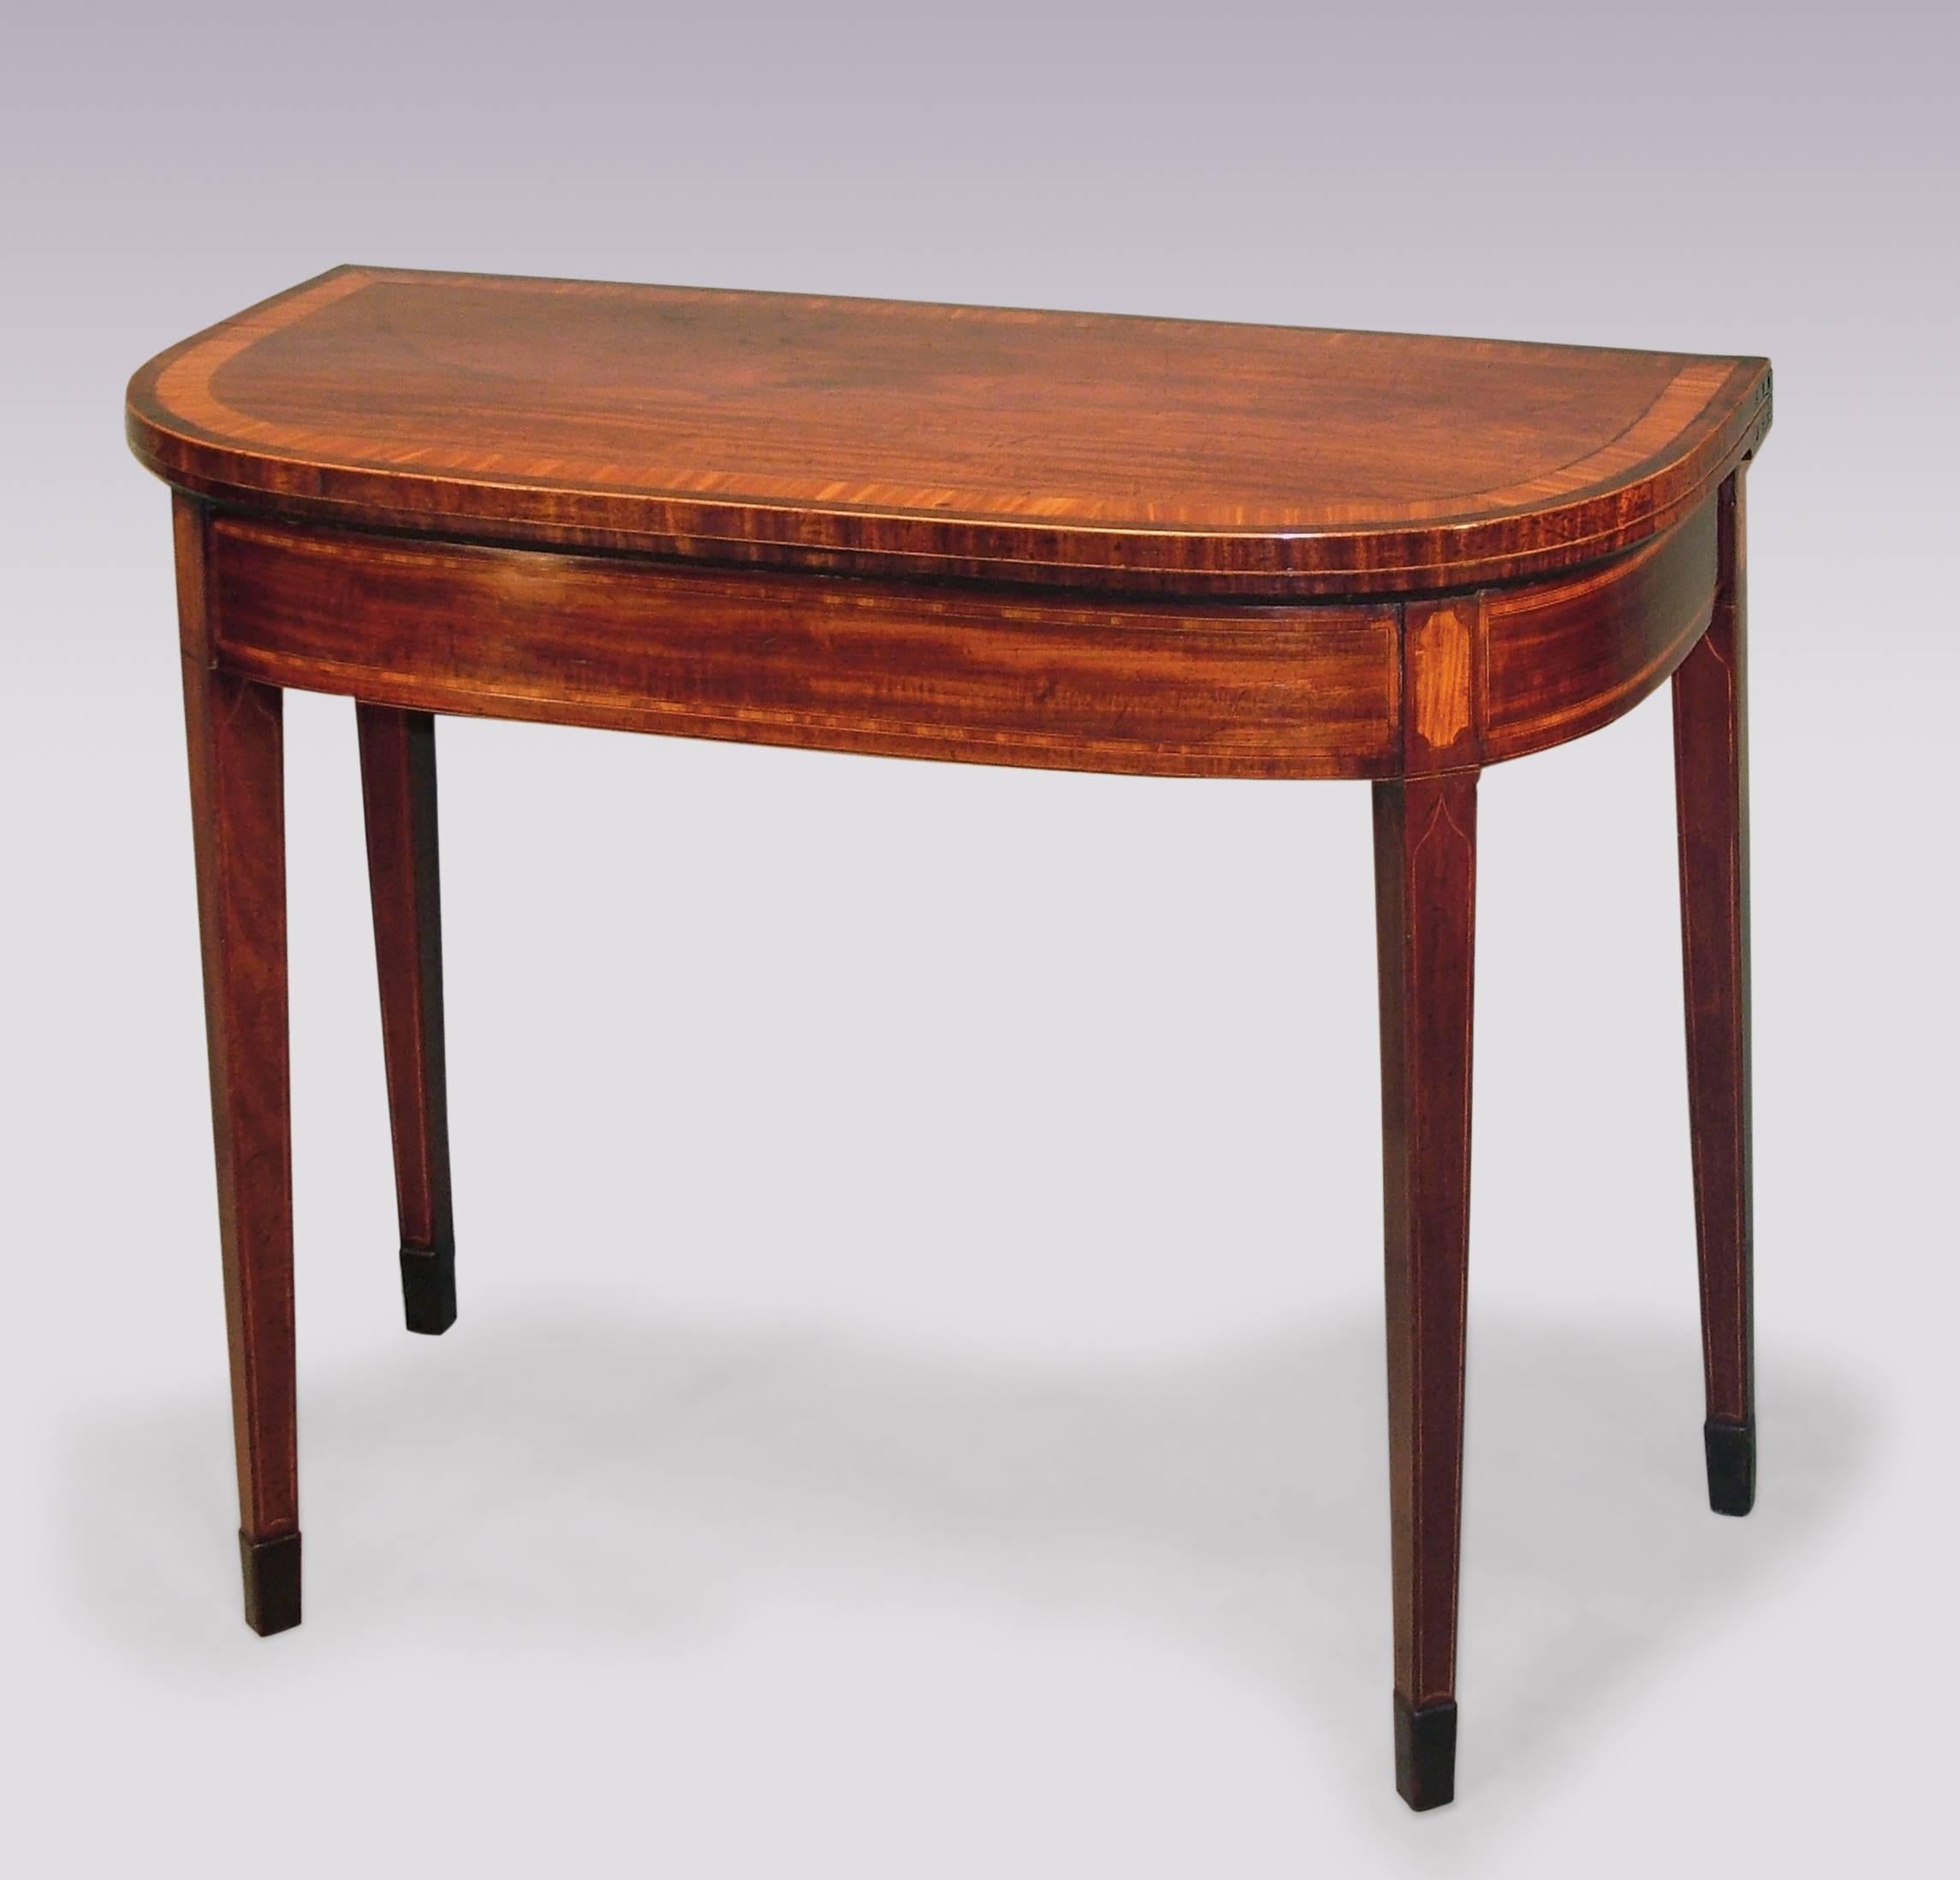 A fine pair of late 18th century Sheraton period well-figured mahogany card tables having satinwood and tulipwood crossbanded D-shaped tops above satinwood panelled friezes, supported on boxwood line-inlaid square tapering legs ending on spade feet.